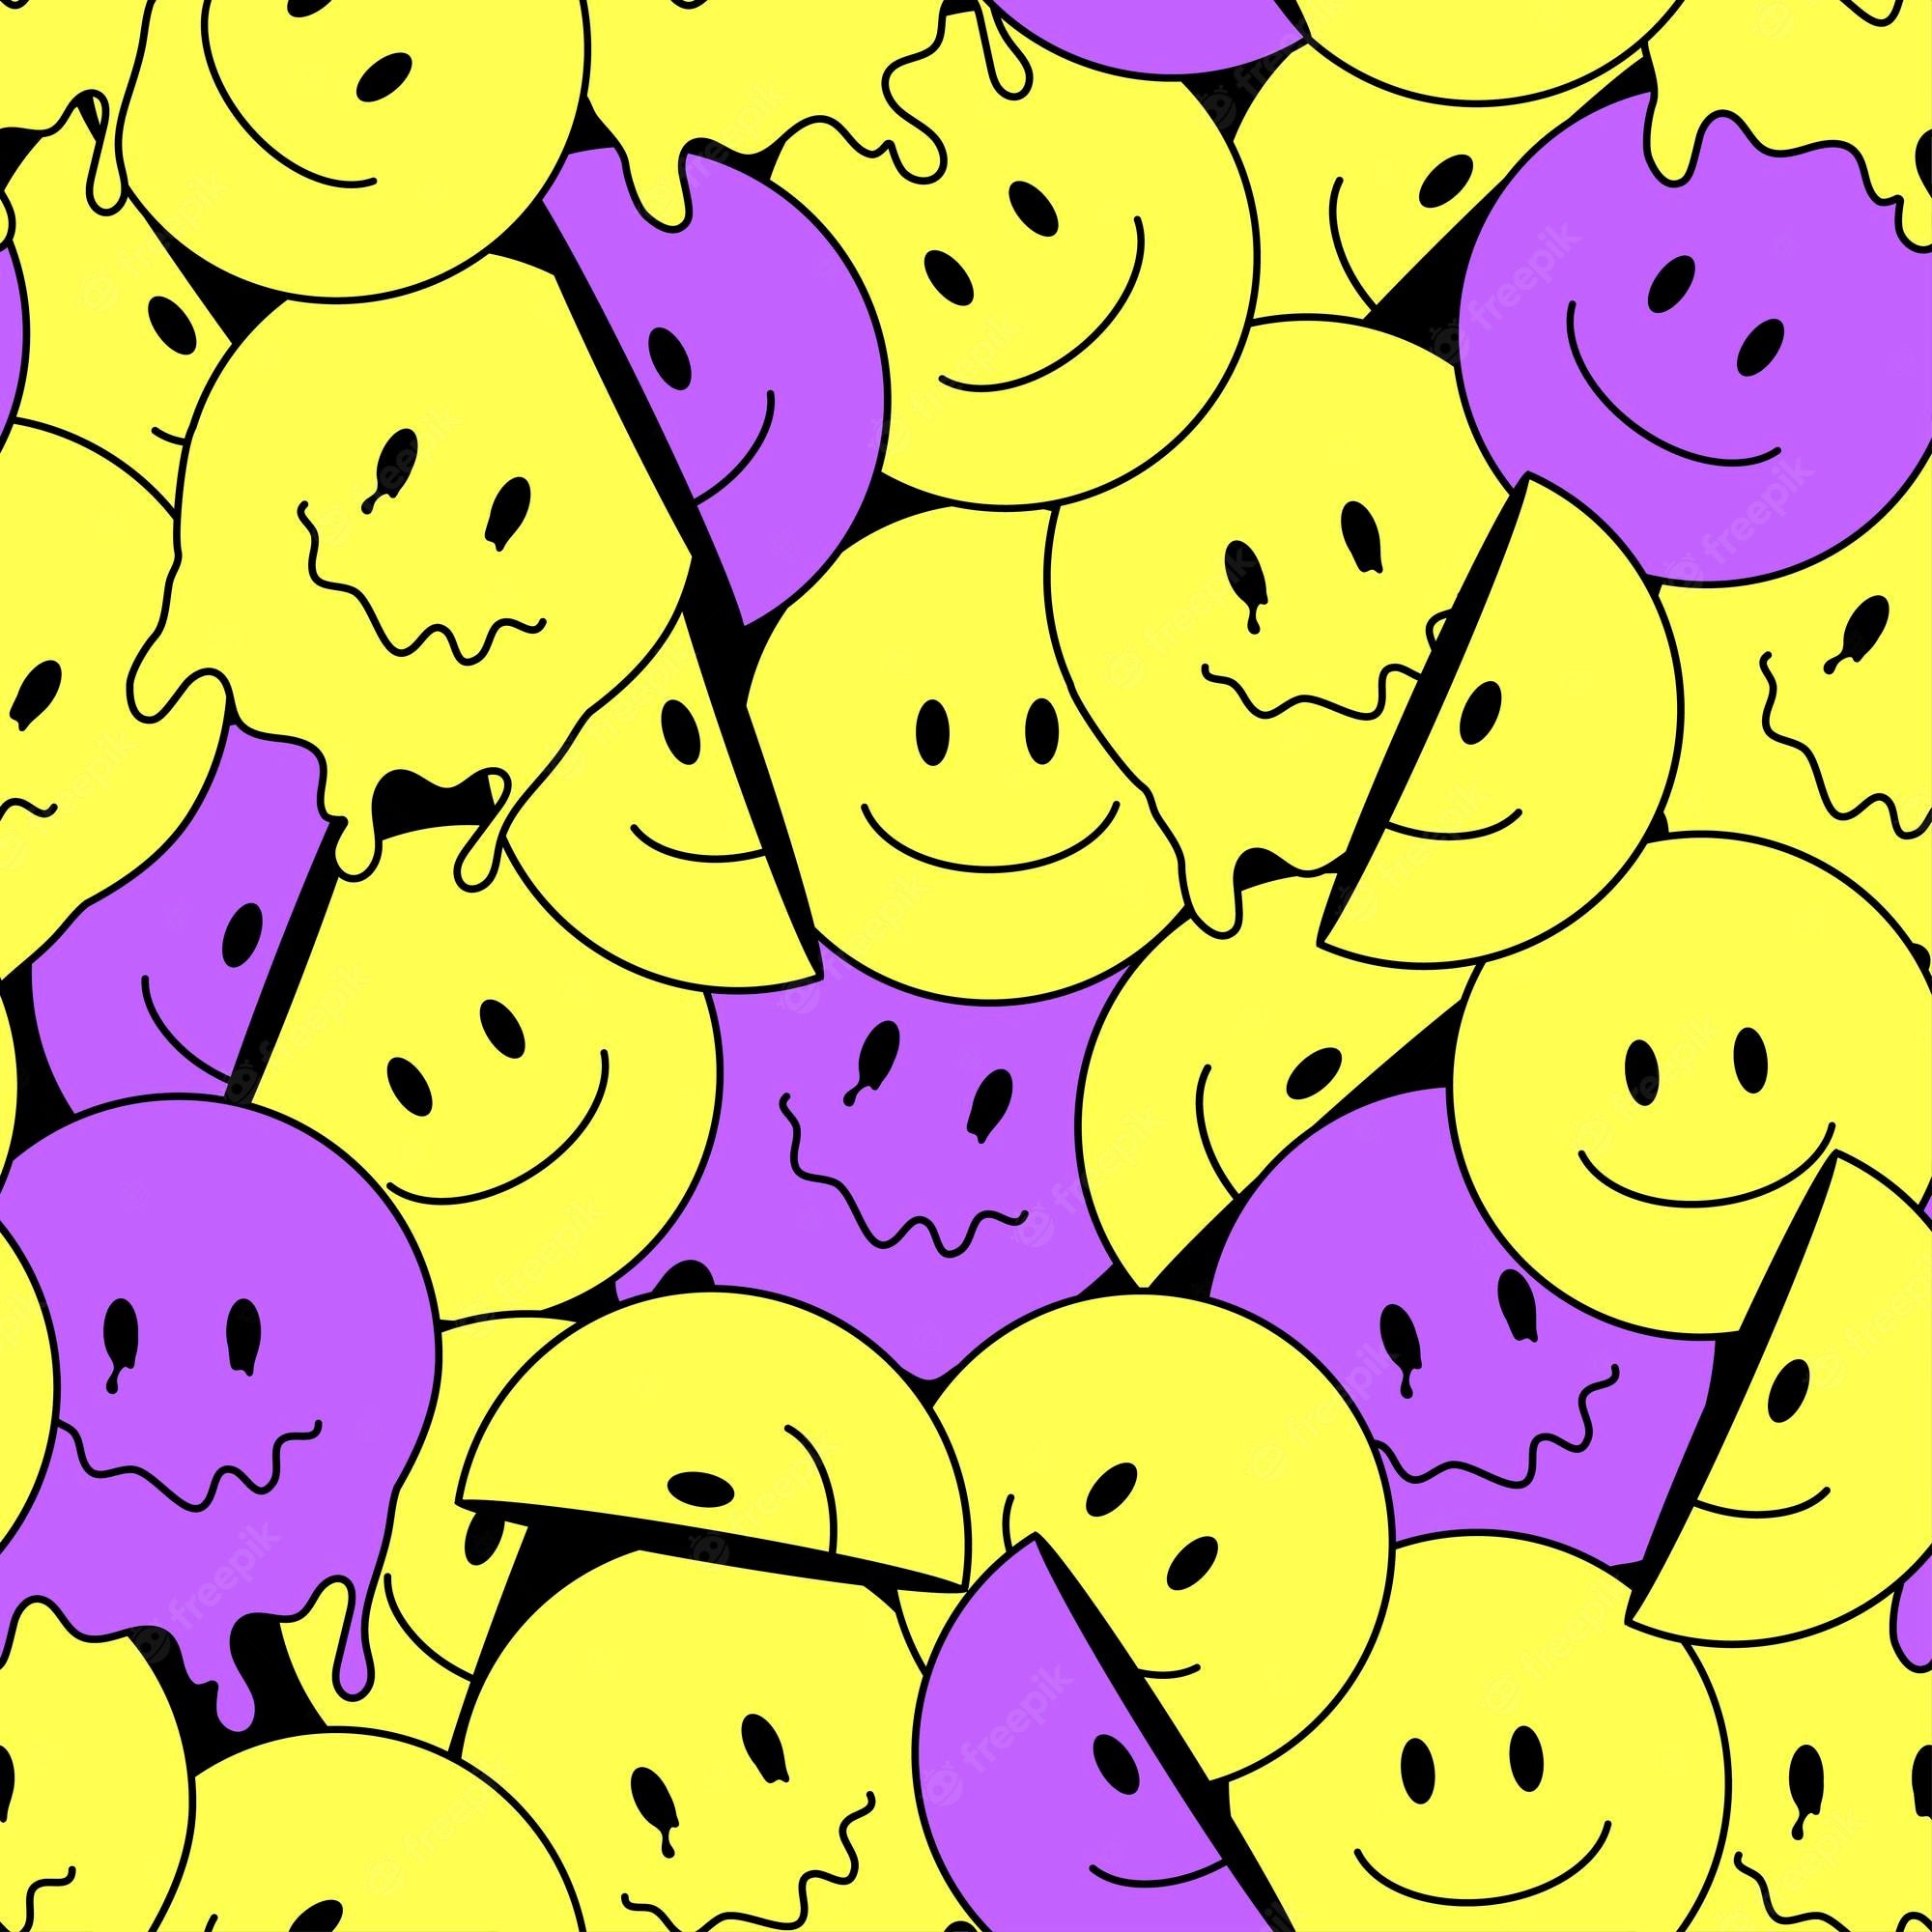 A pattern of smiley faces on purple and yellow background - Y2K